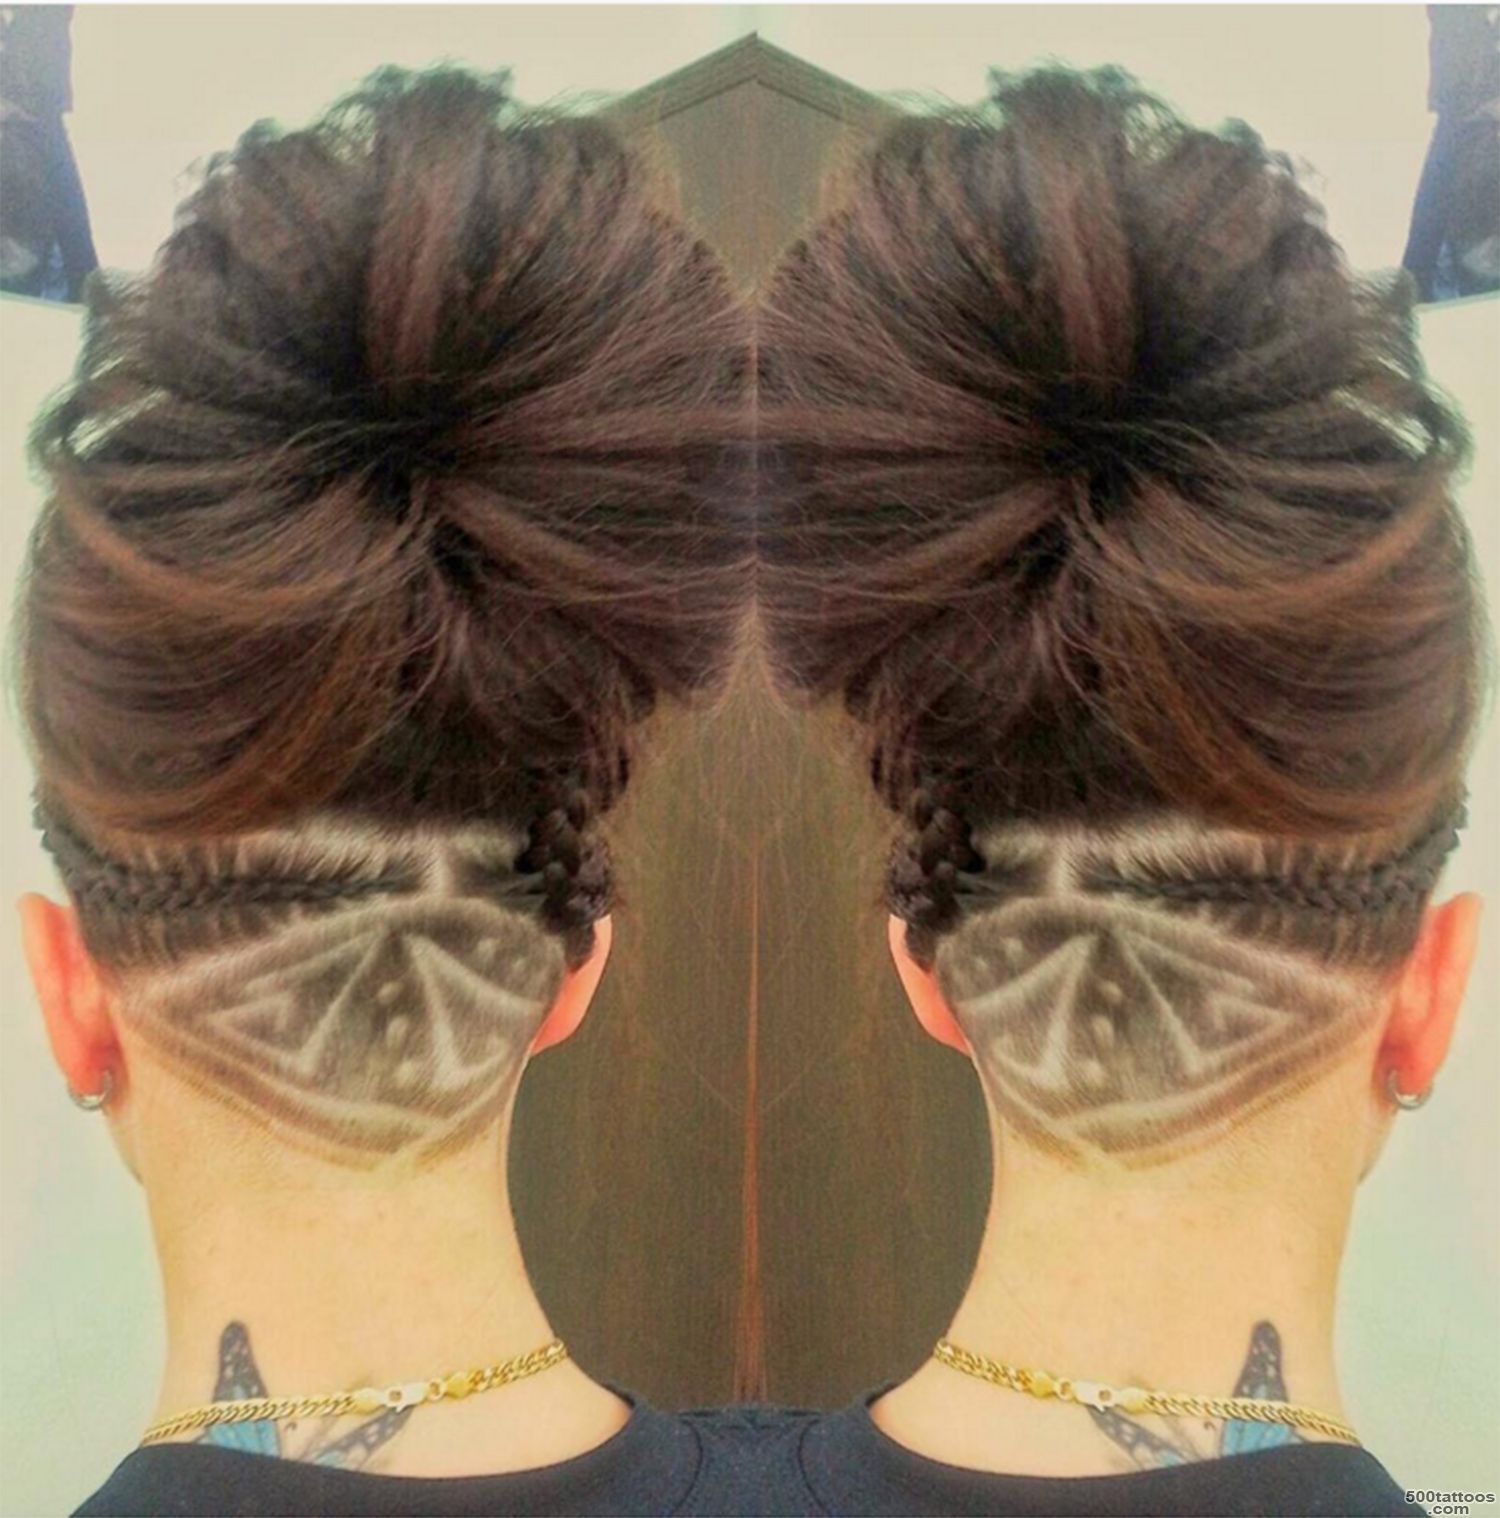 Now you see it How hidden hair #39tattoos#39 are the latest craze to ..._10